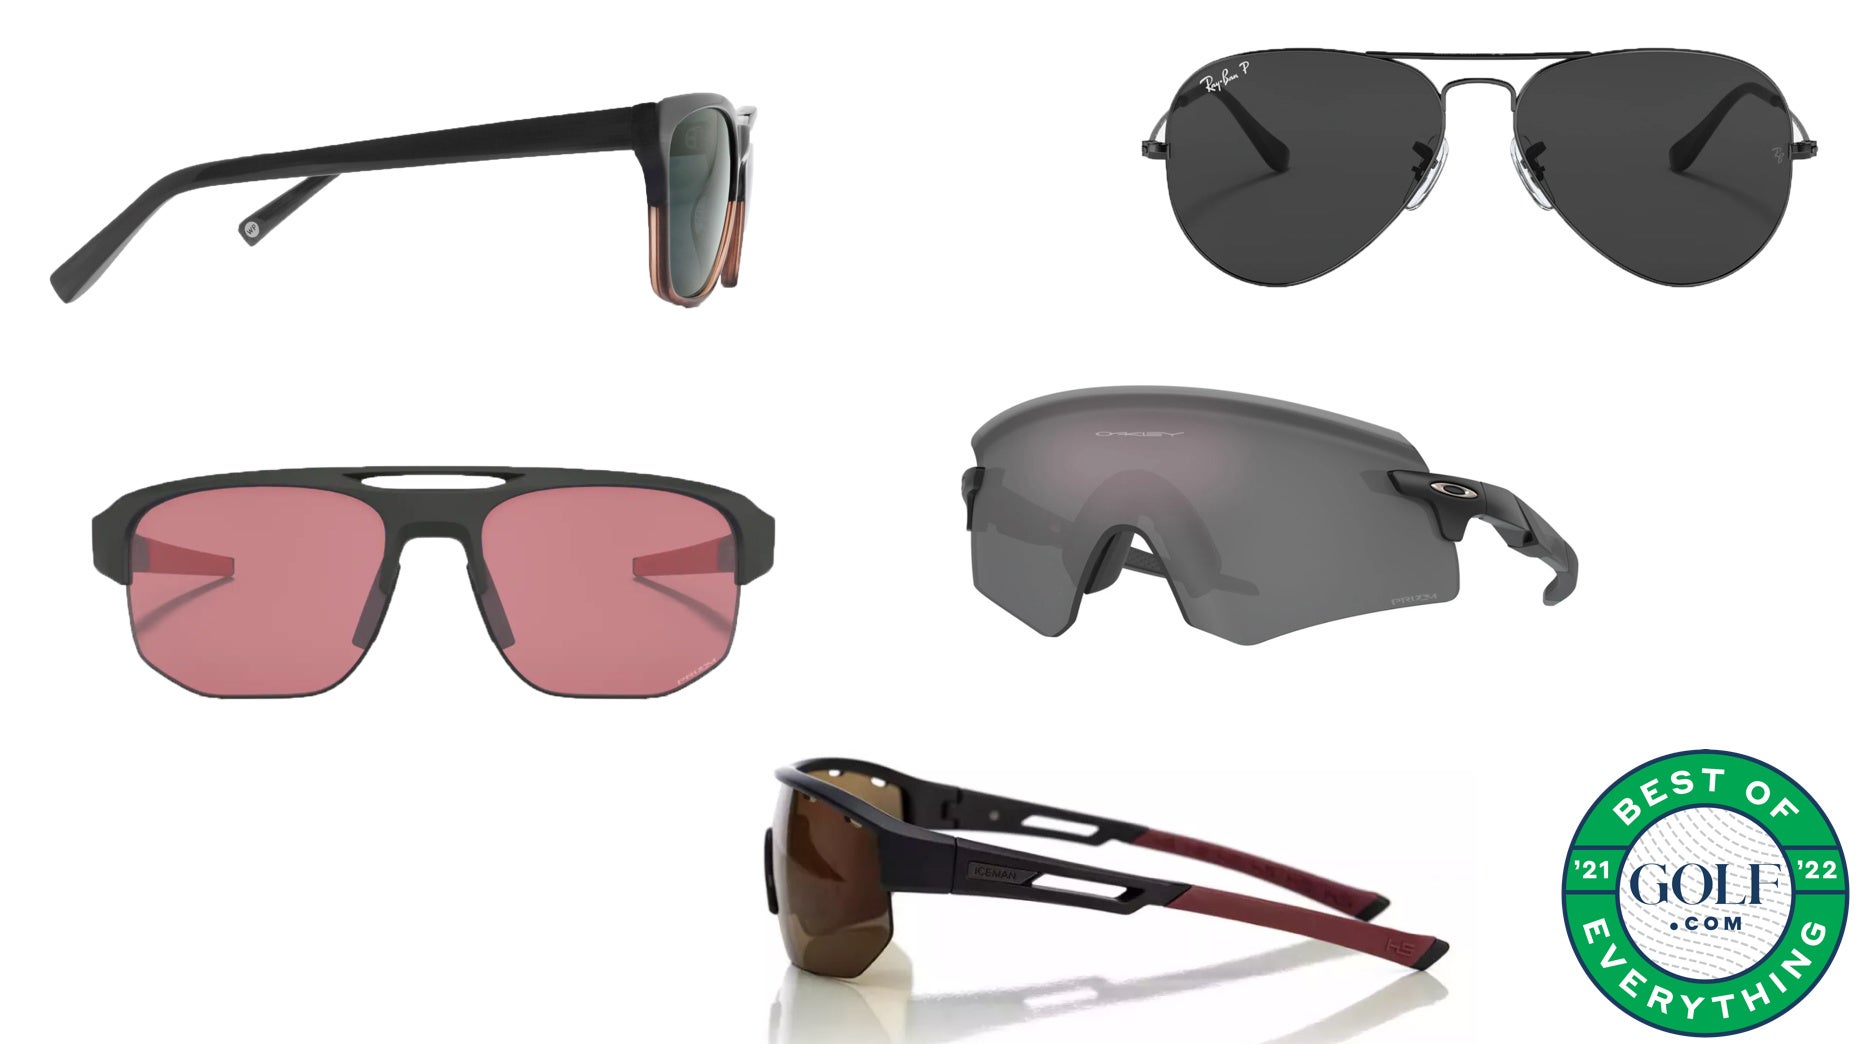 Best of Everything 2021/22: The best golf sunglasses for every